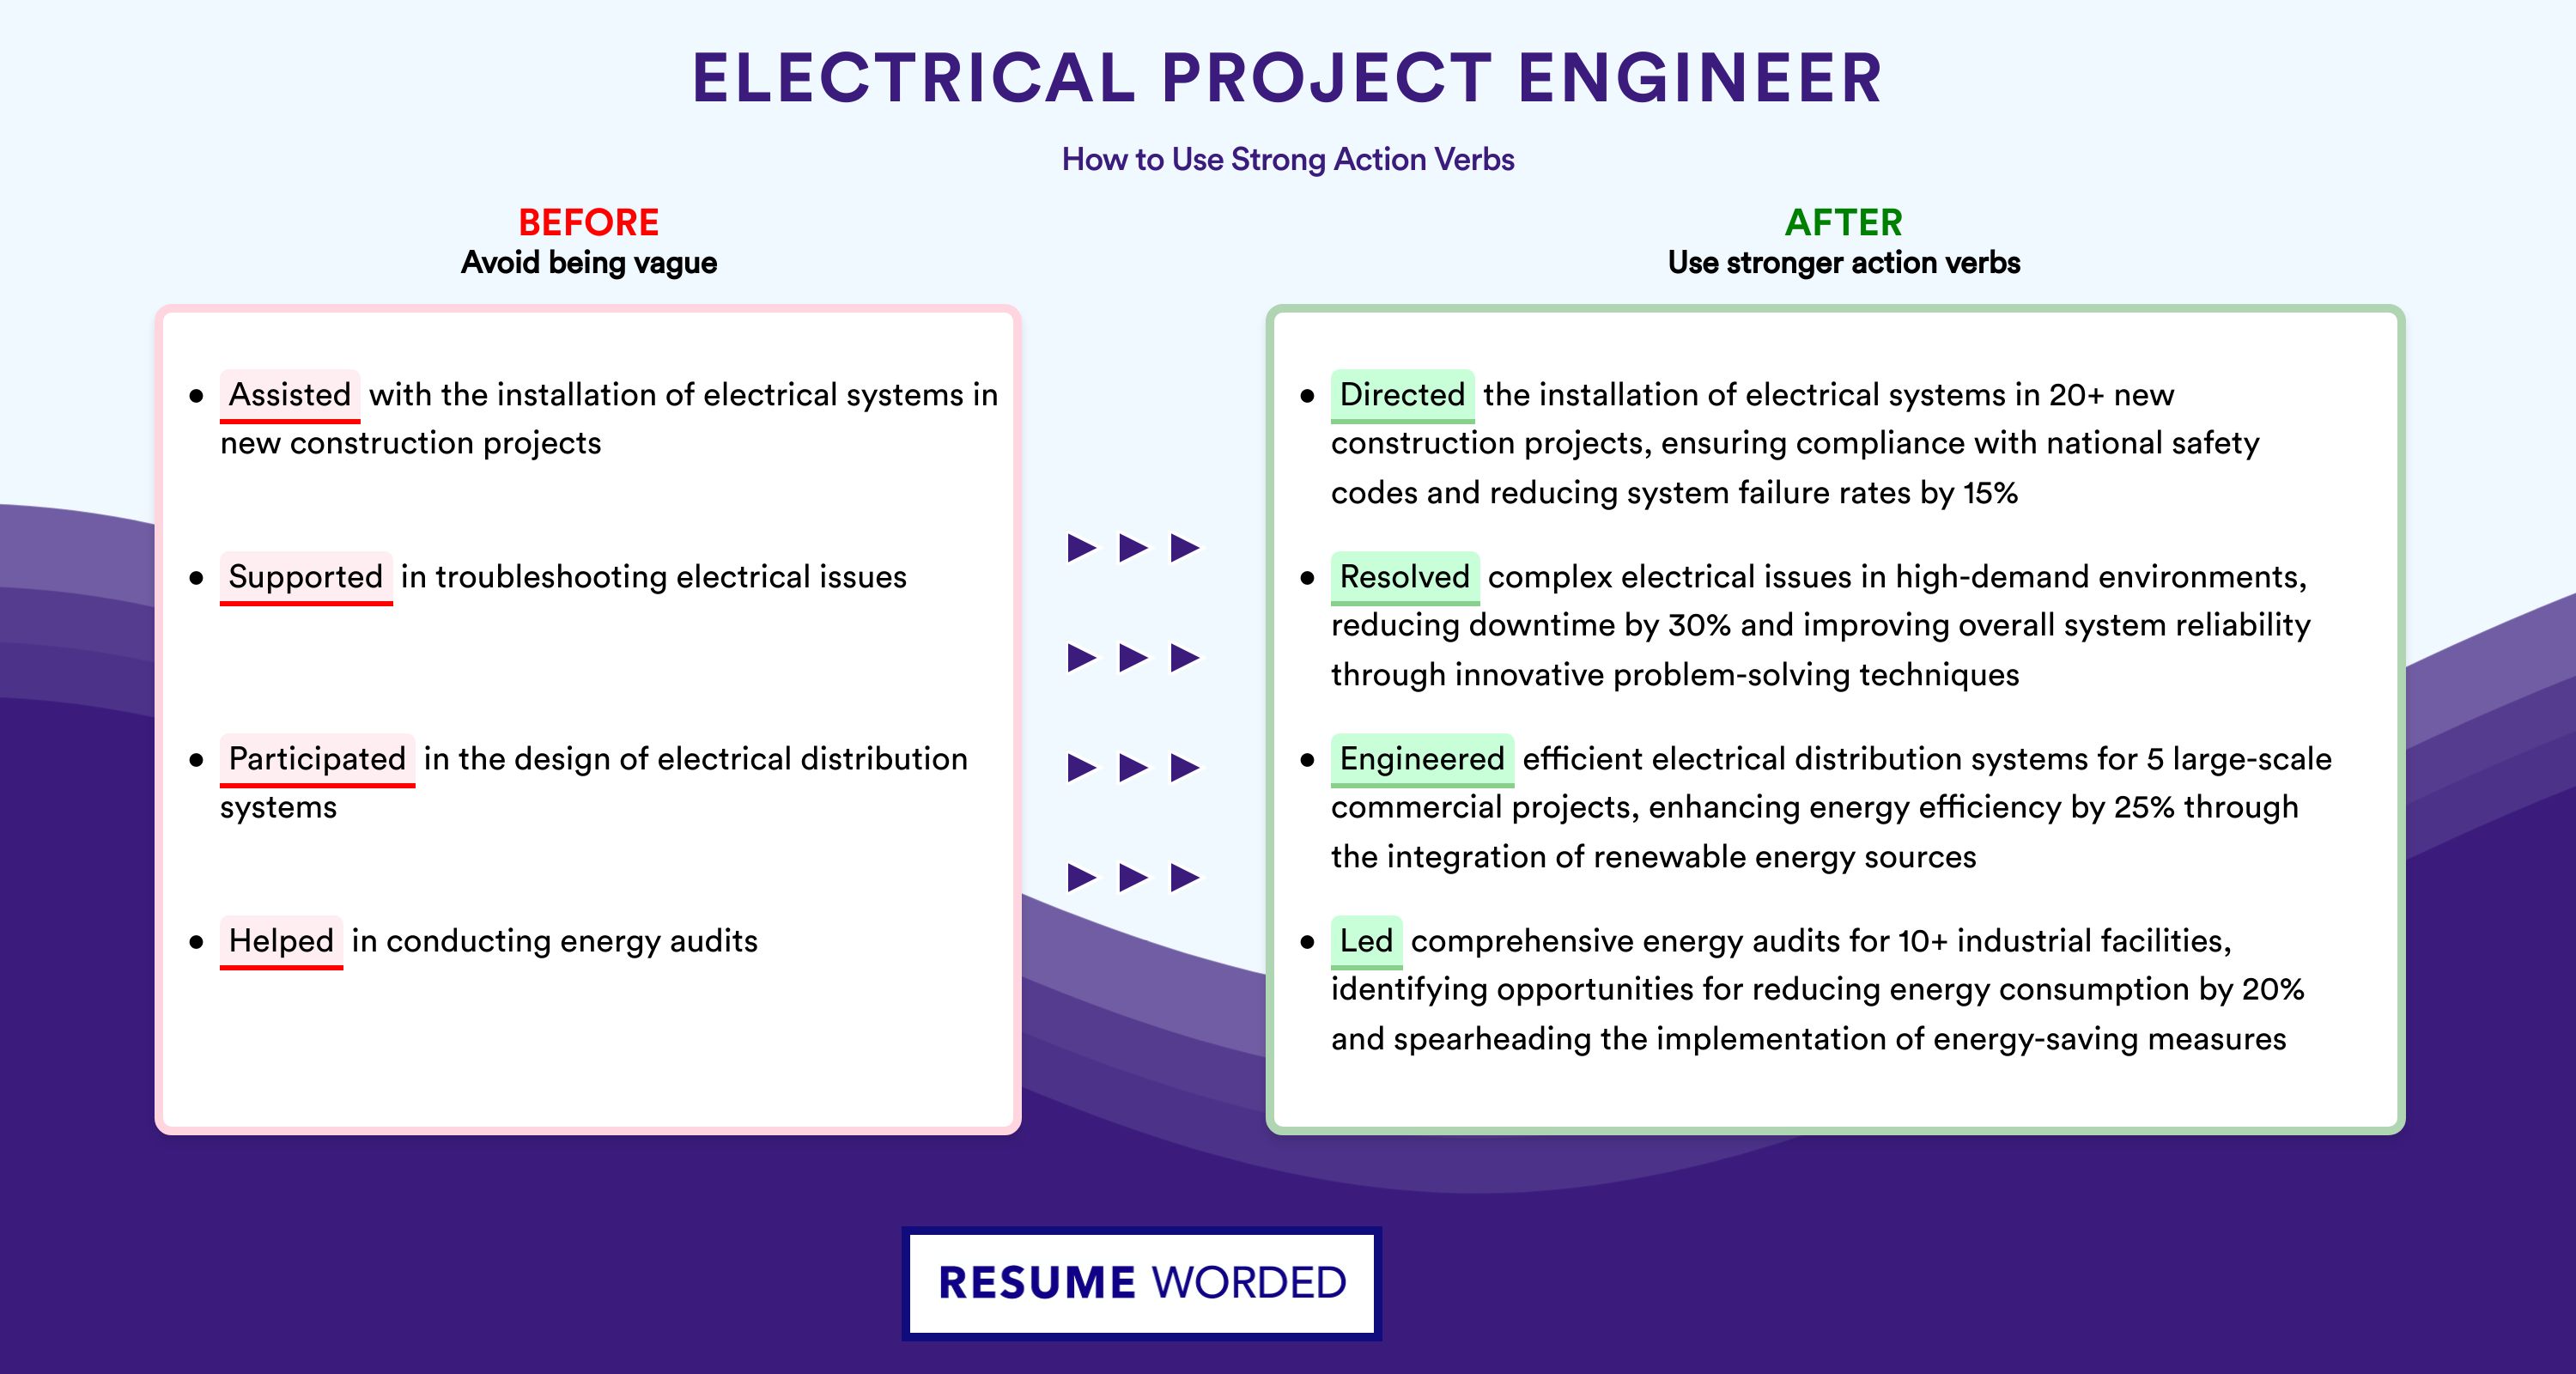 Action Verbs for Electrical Project Engineer